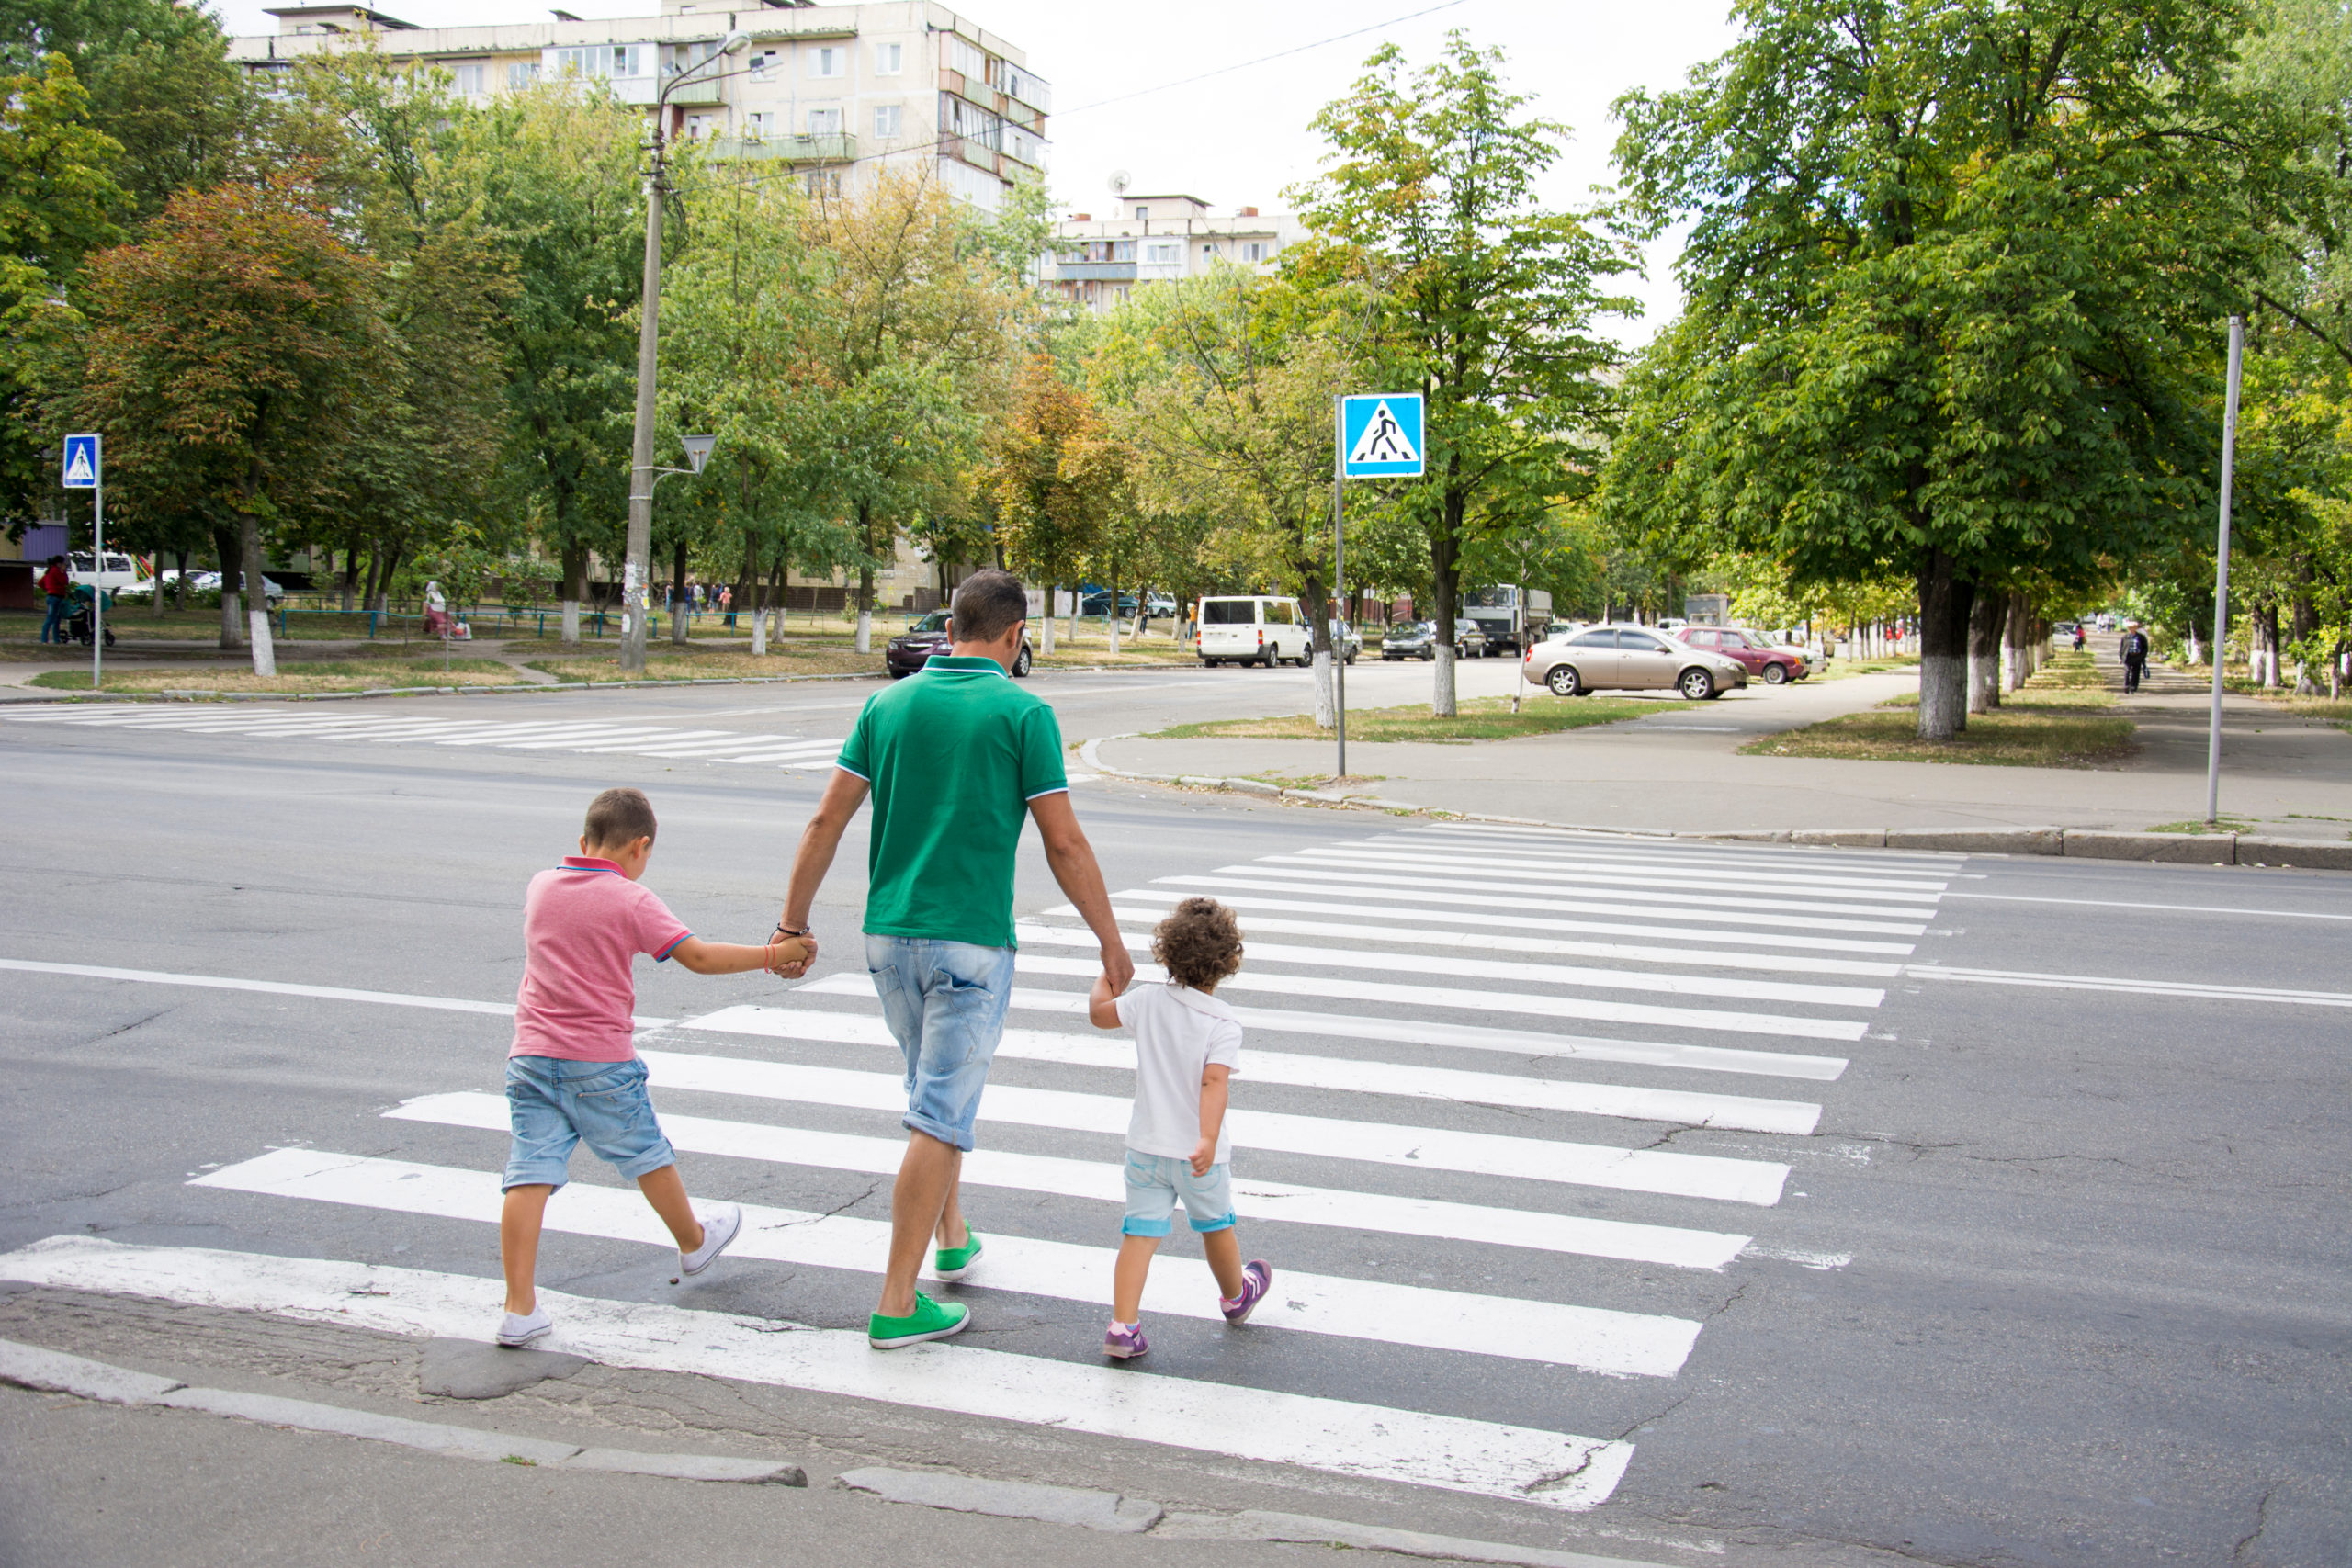 Pedestrian Accidents Are On the Rise, Are You At Risk?